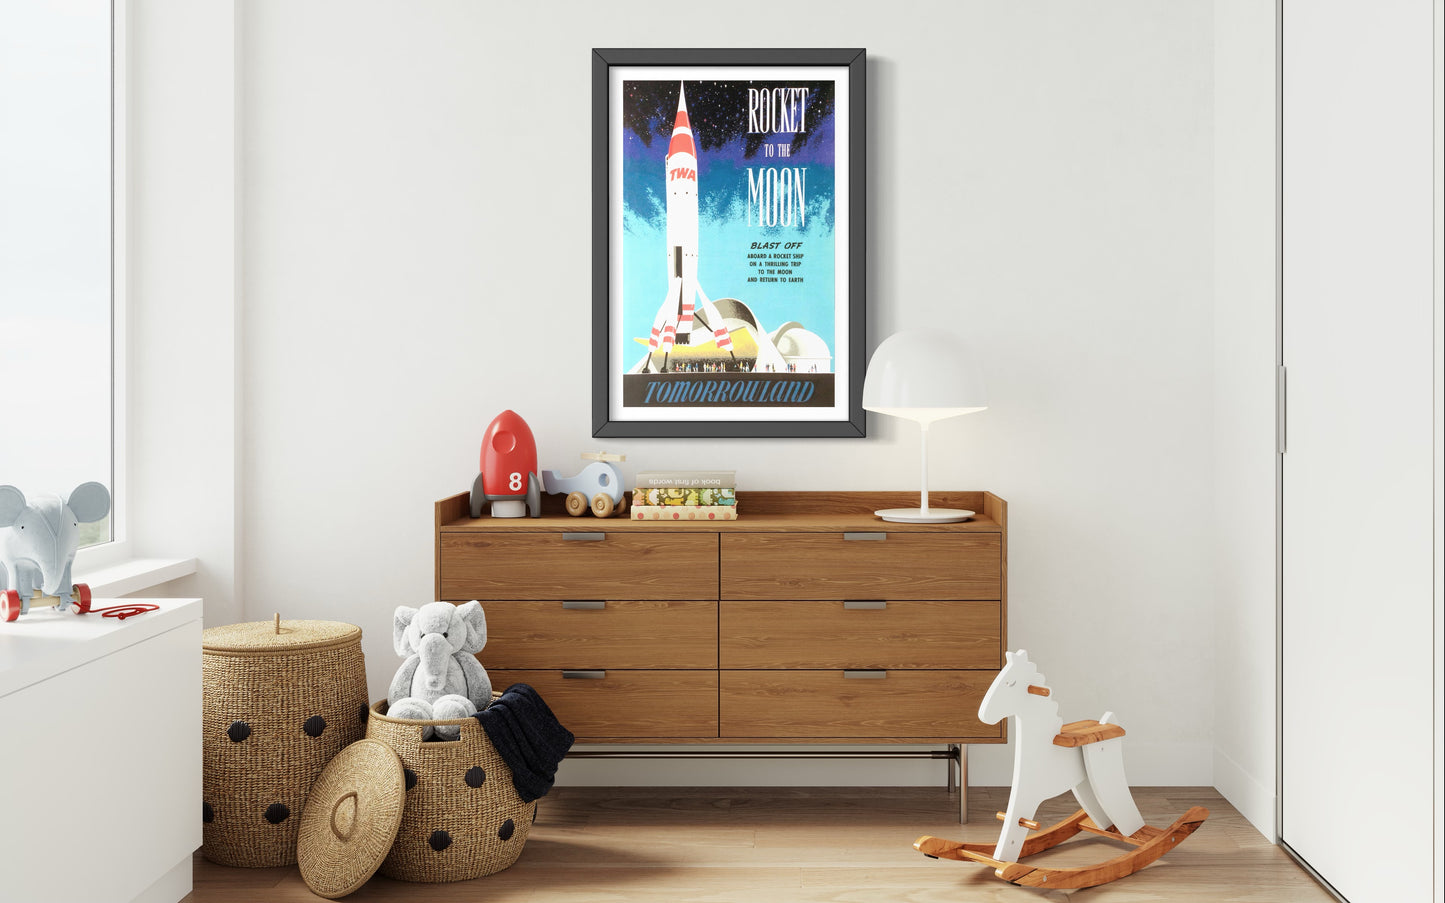 Rocket to the Moon Tomorrowland Poster